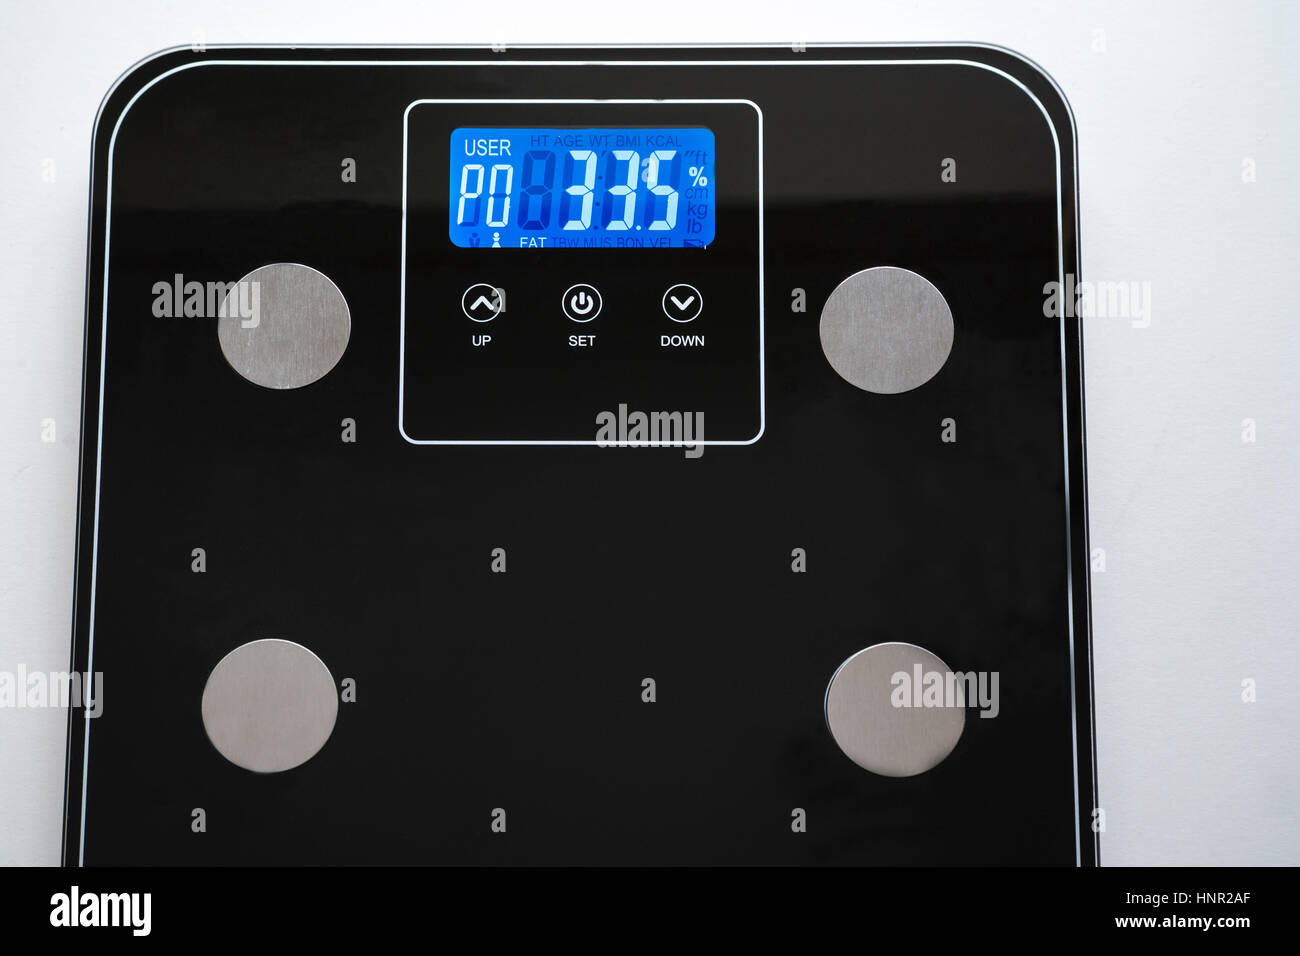 Body Fat Monitor And Padometer High-Res Stock Photo - Getty Images